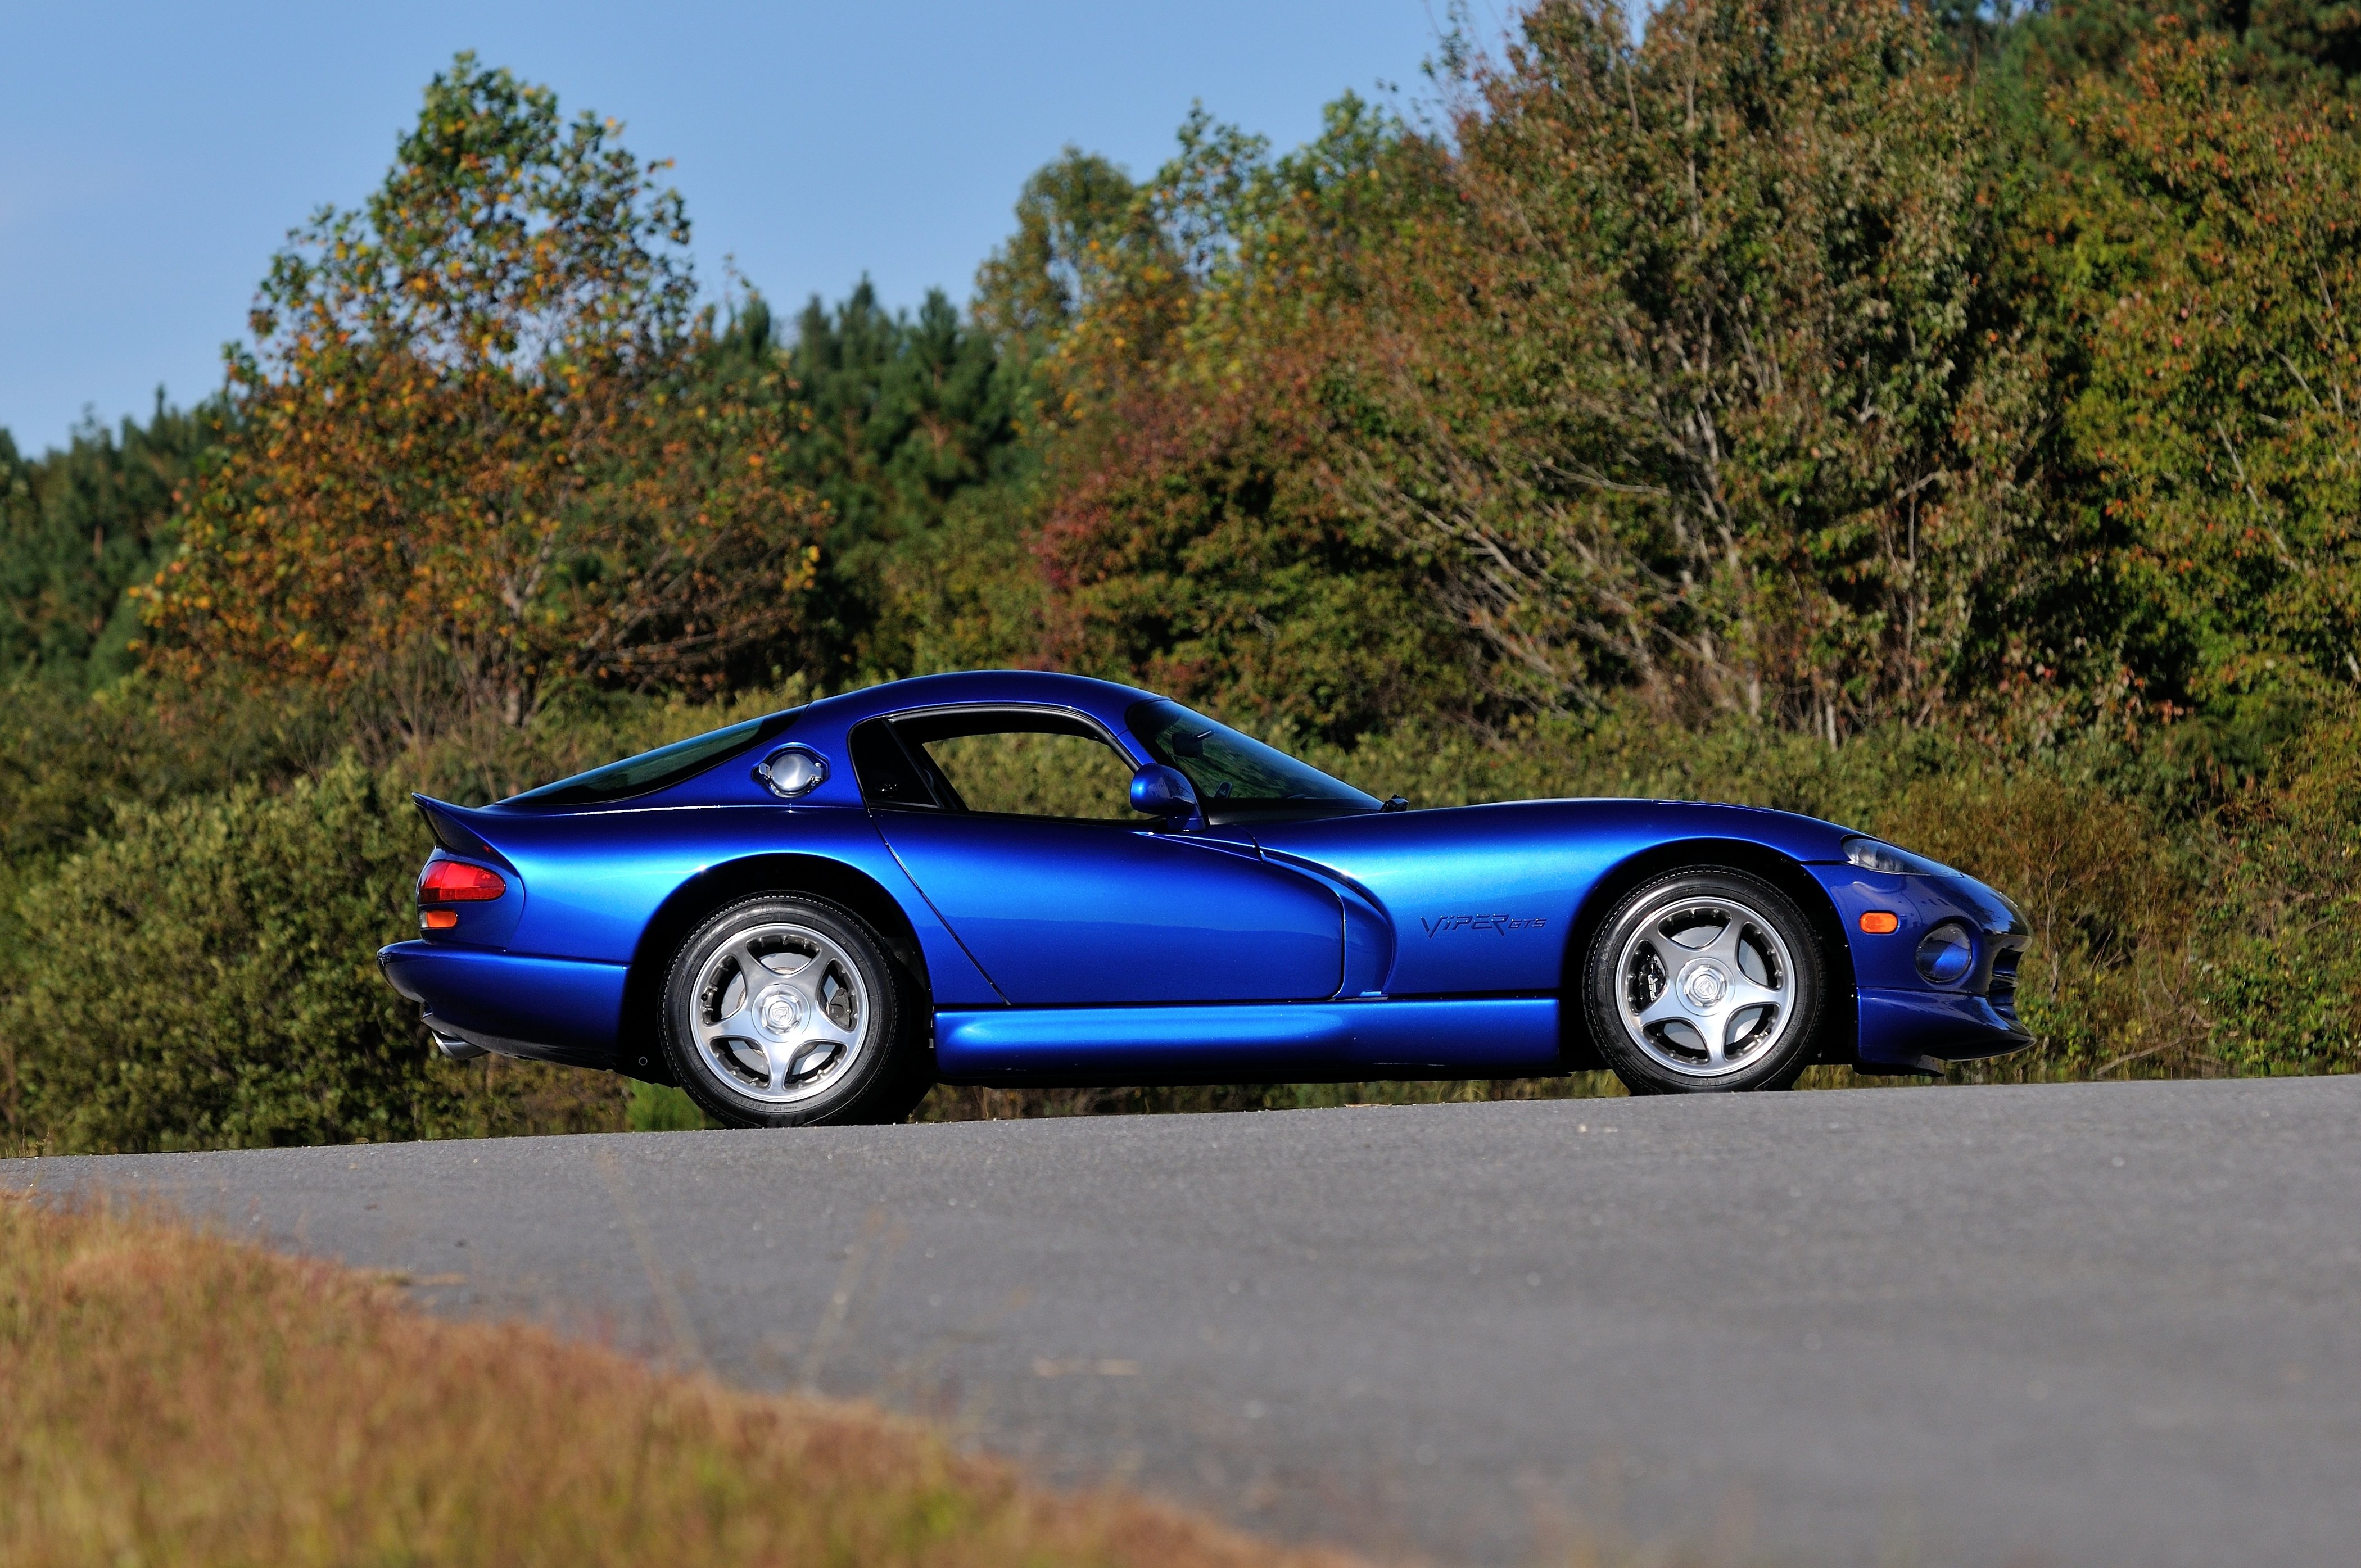 1996, Dodge, Viper, Gts, Coupe, Muscle, Supercar, Usa, 4200x2790 02 Wallpaper